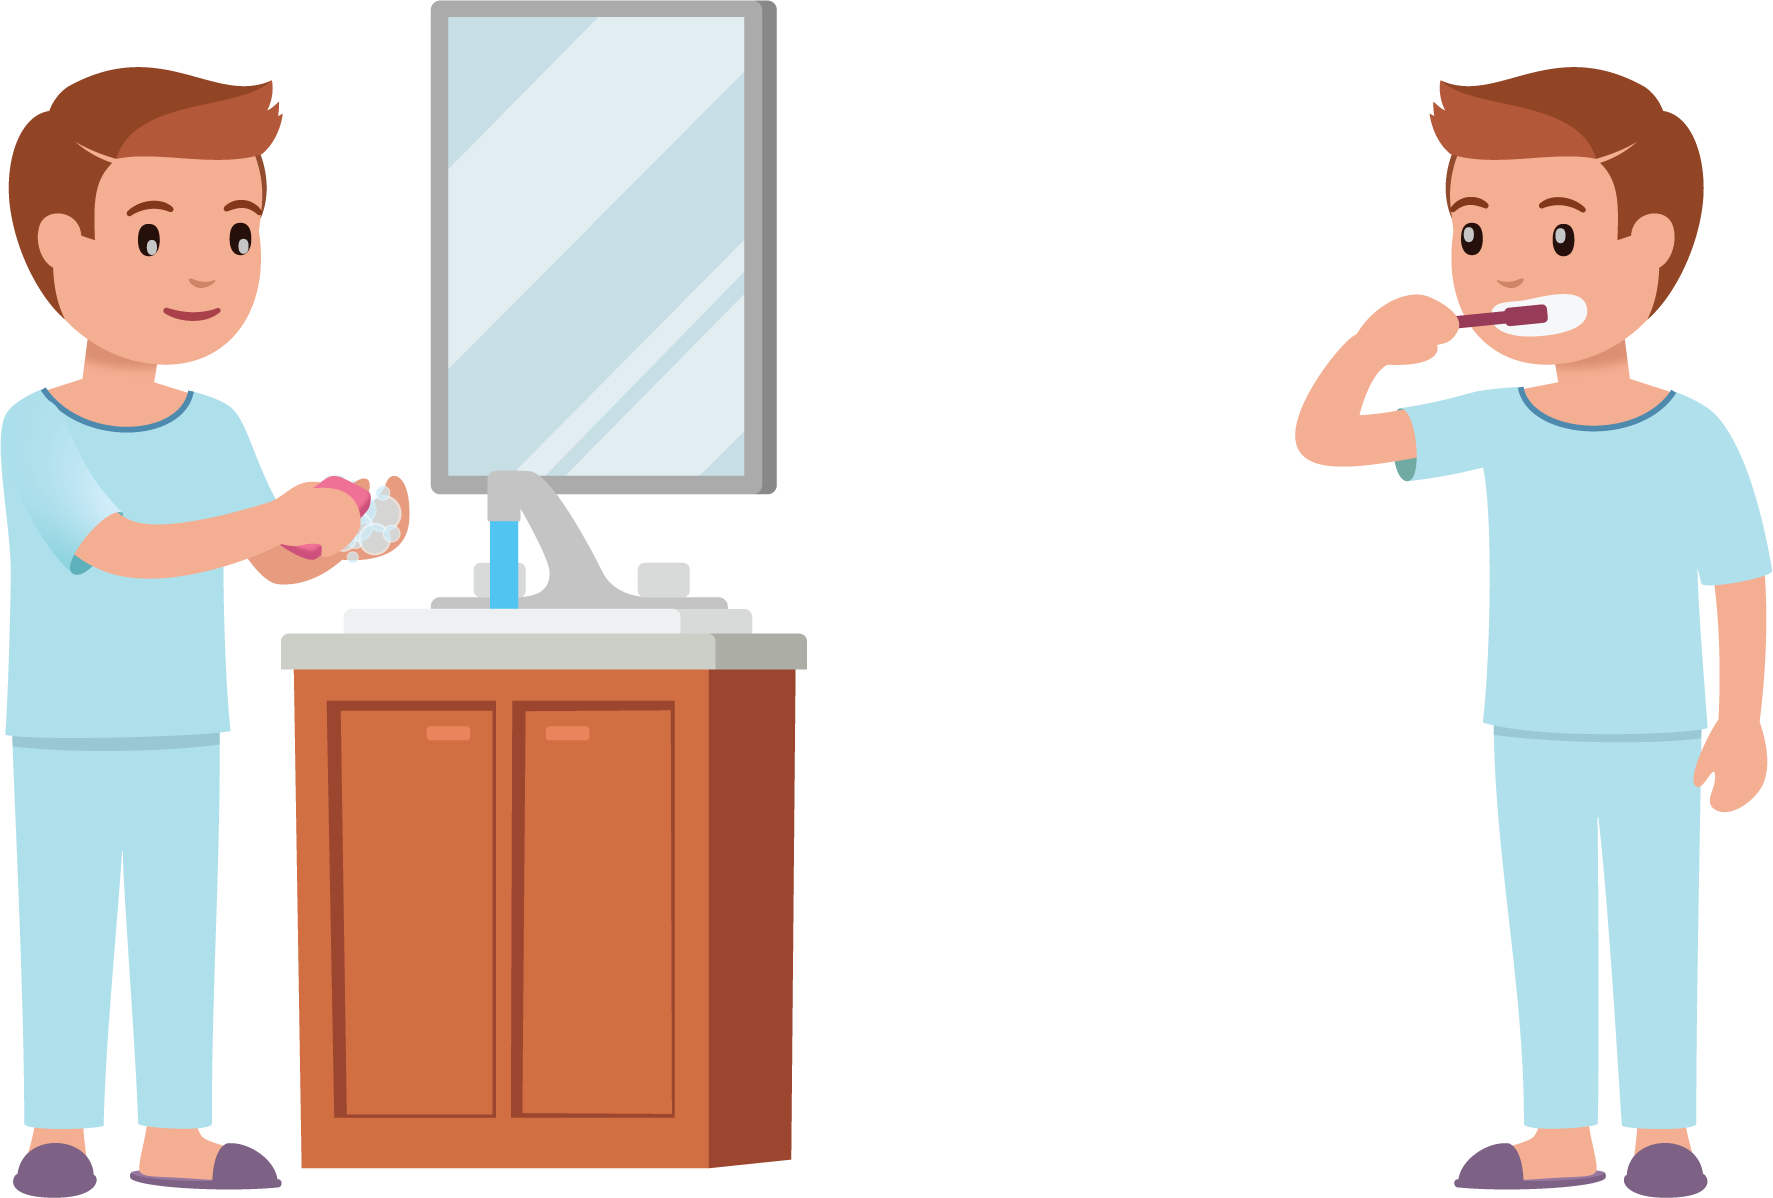 image of a student washing hands on the left and brushing teeth on the right